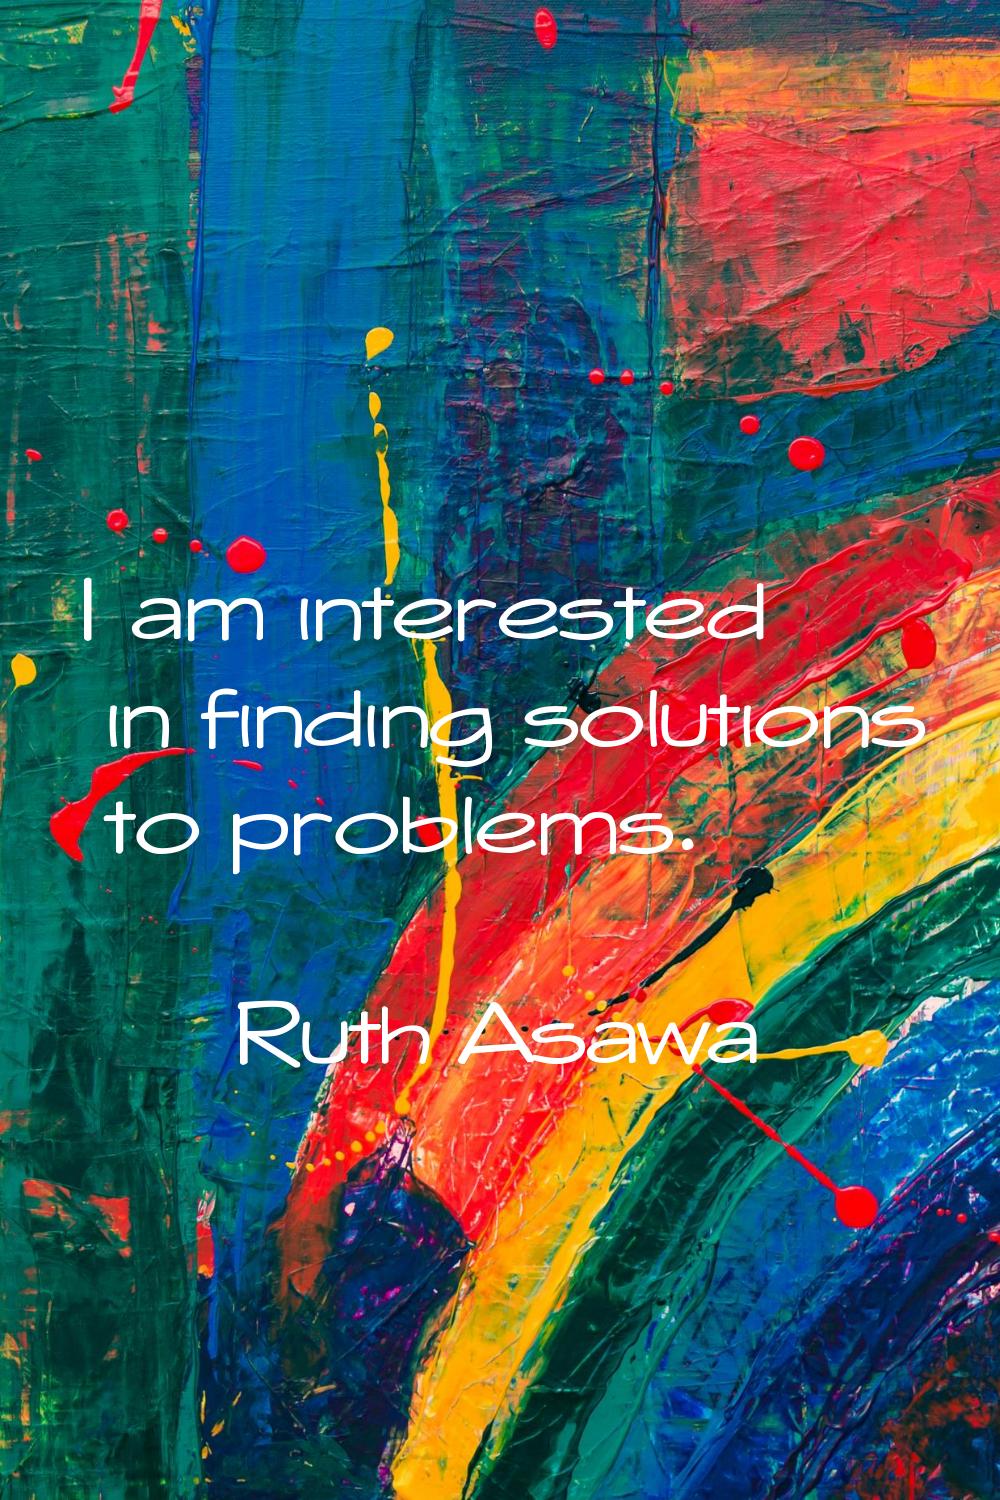 I am interested in finding solutions to problems.